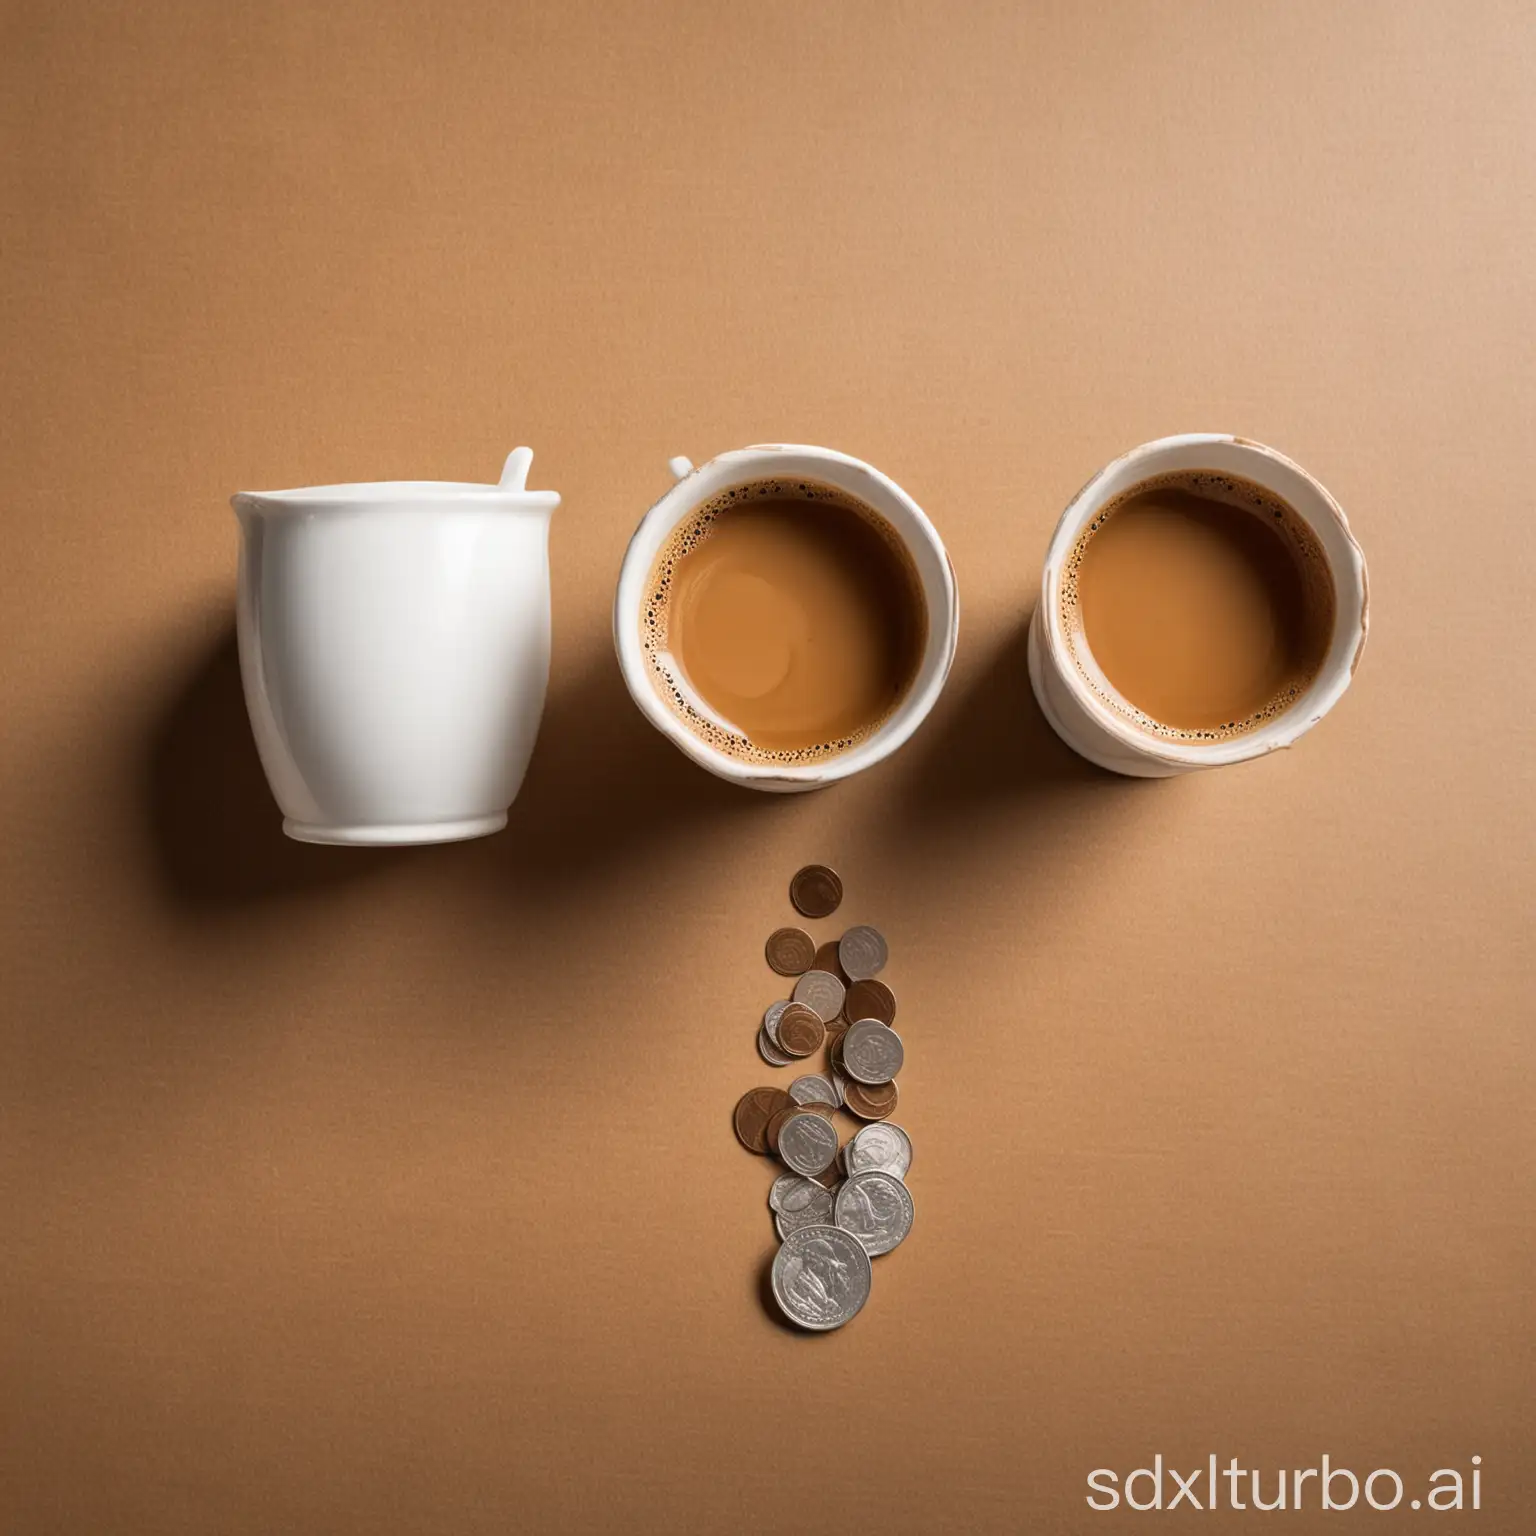 Three-UpsideDown-Coffee-Cups-with-Coin-on-Table